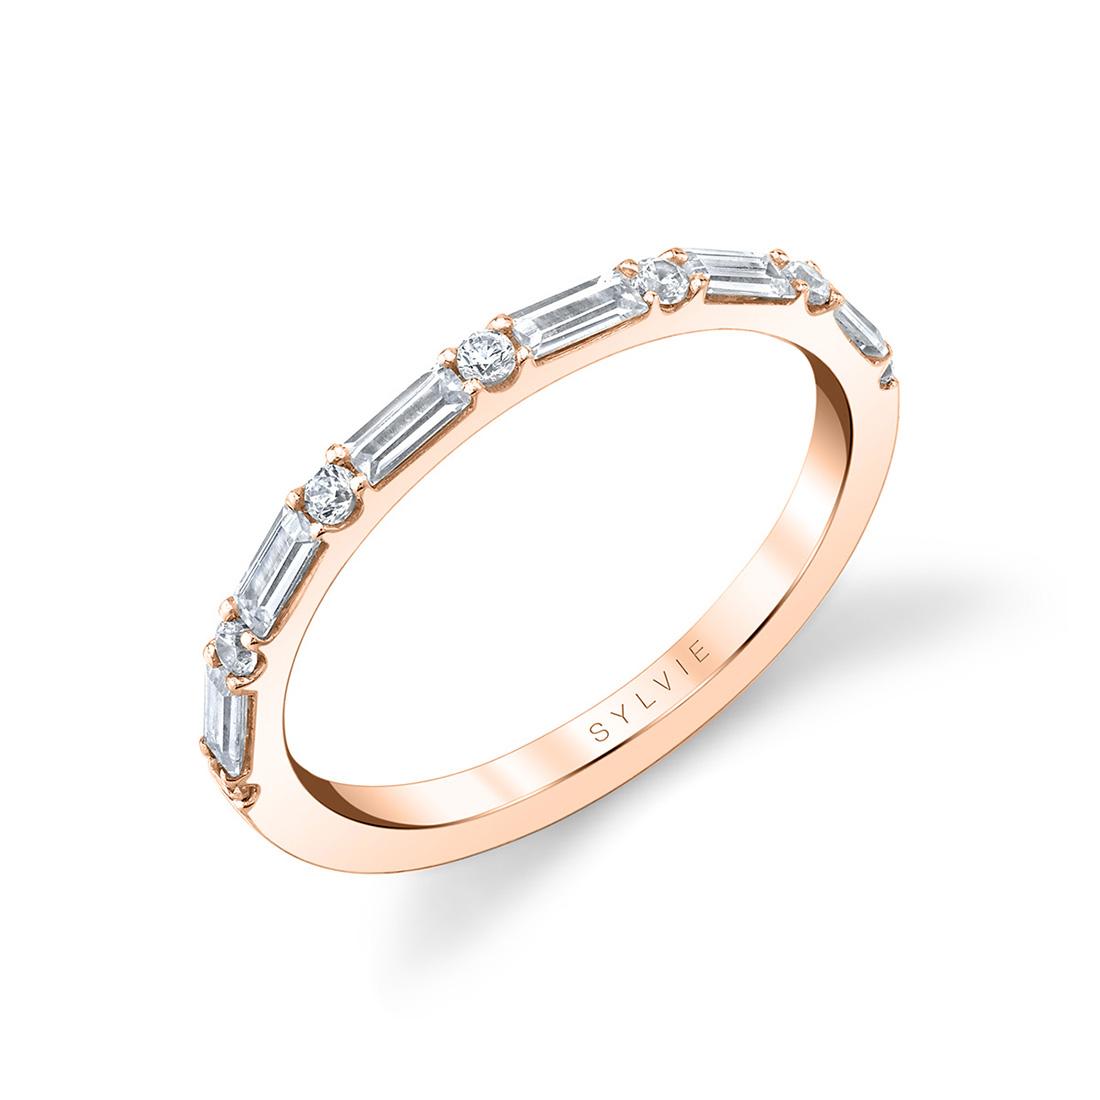 baguette diamond wedding band in rose gold